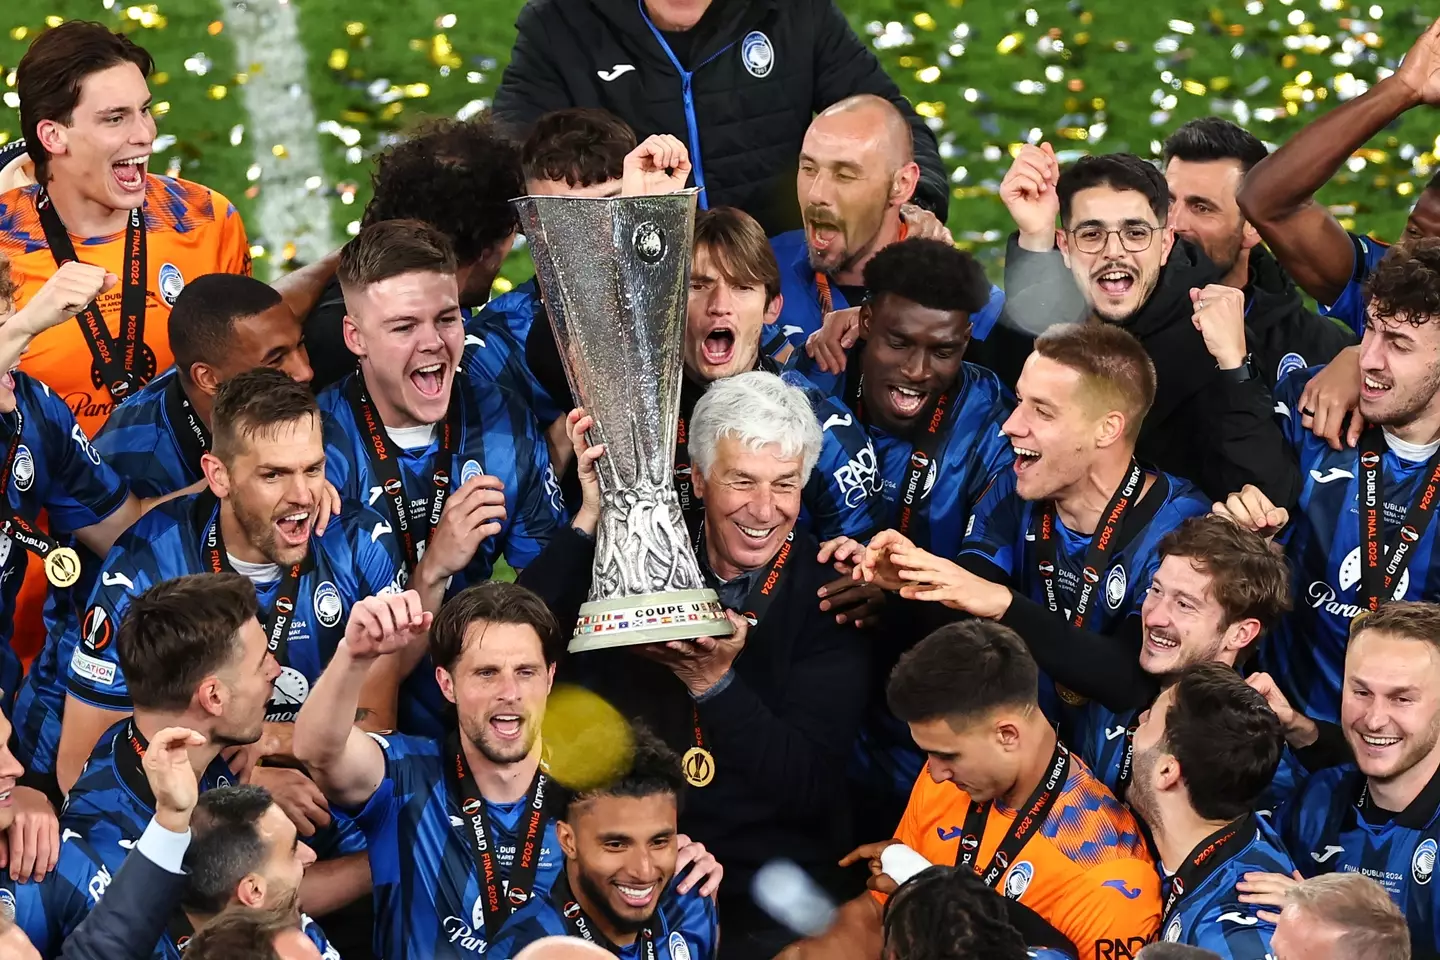 Gasperini guided Atalanta to a first ever European trophy.